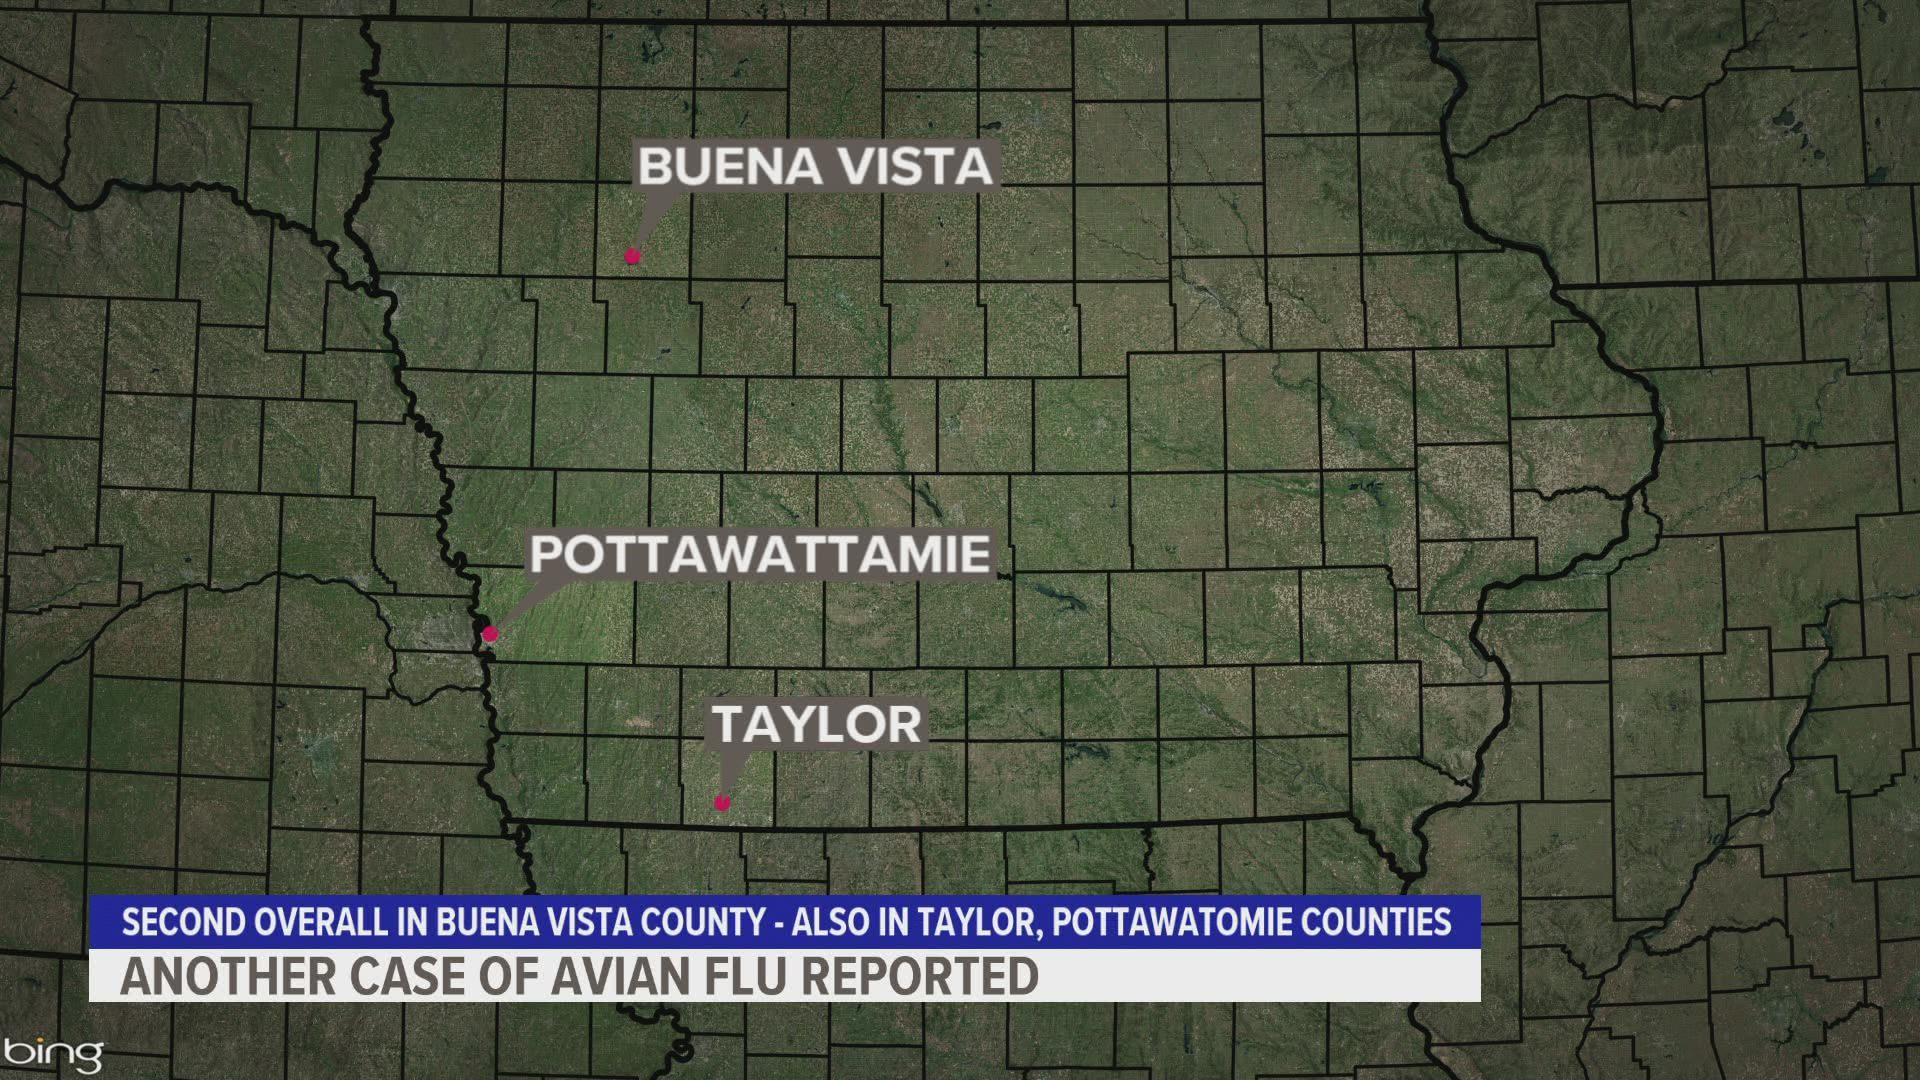 This is the second confirmed case of avian influenza in Buena Vista County.